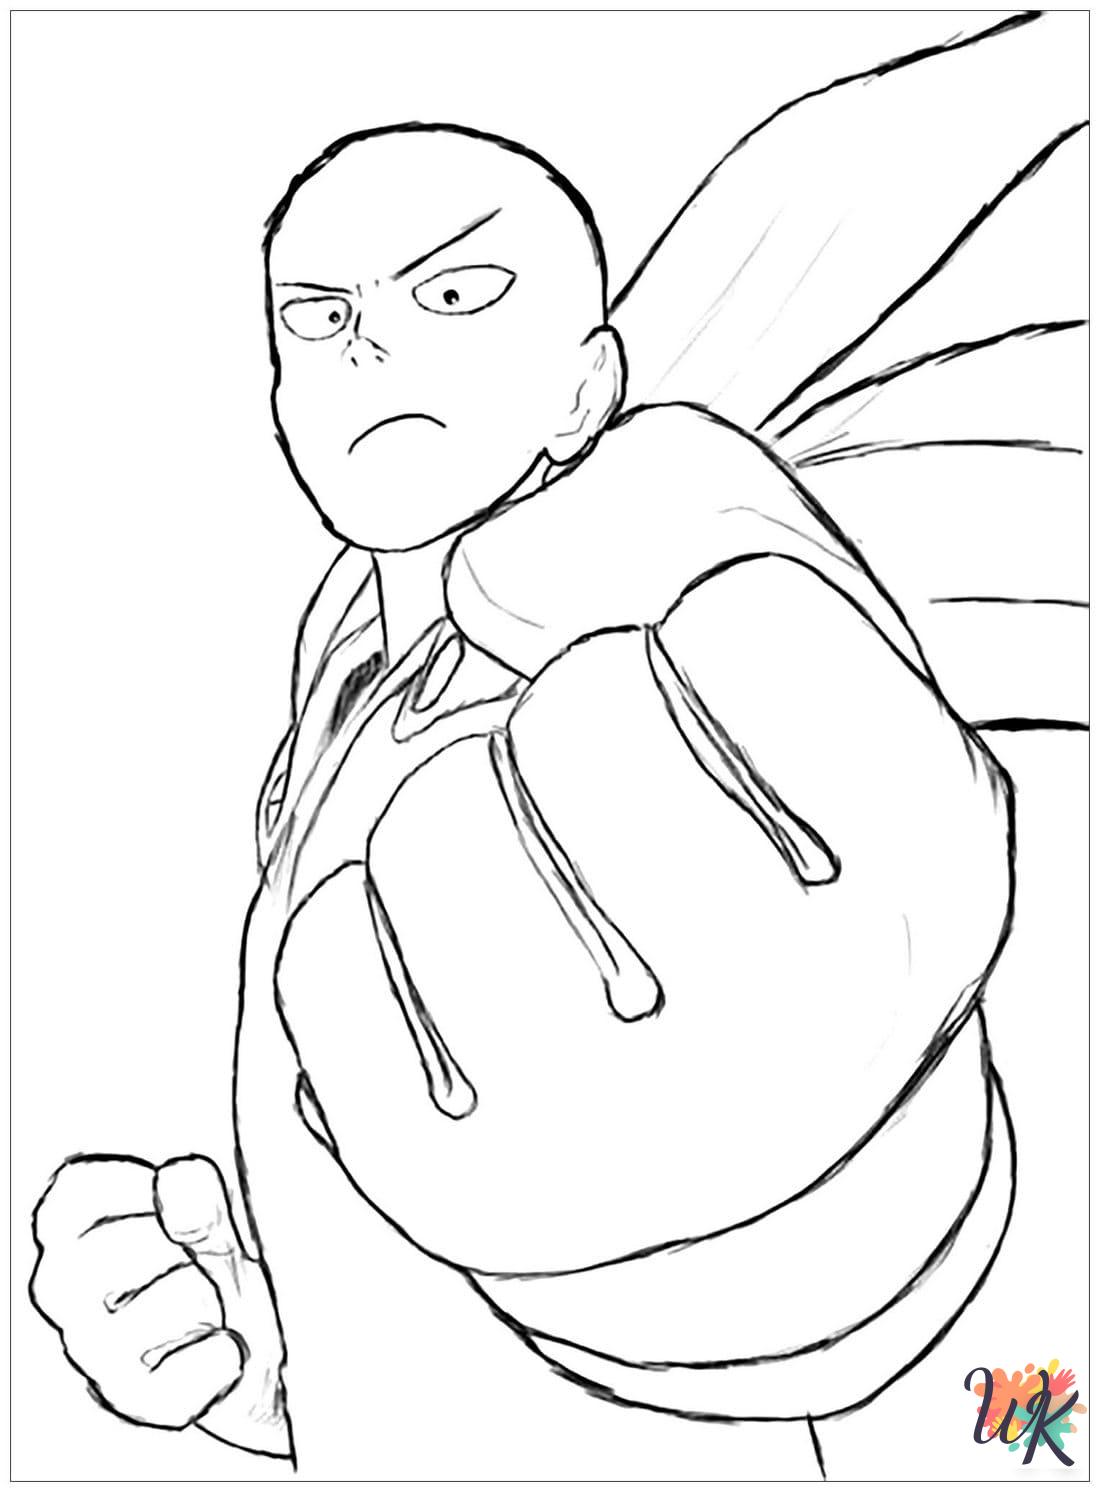 One-Punch Man coloring pages for adults